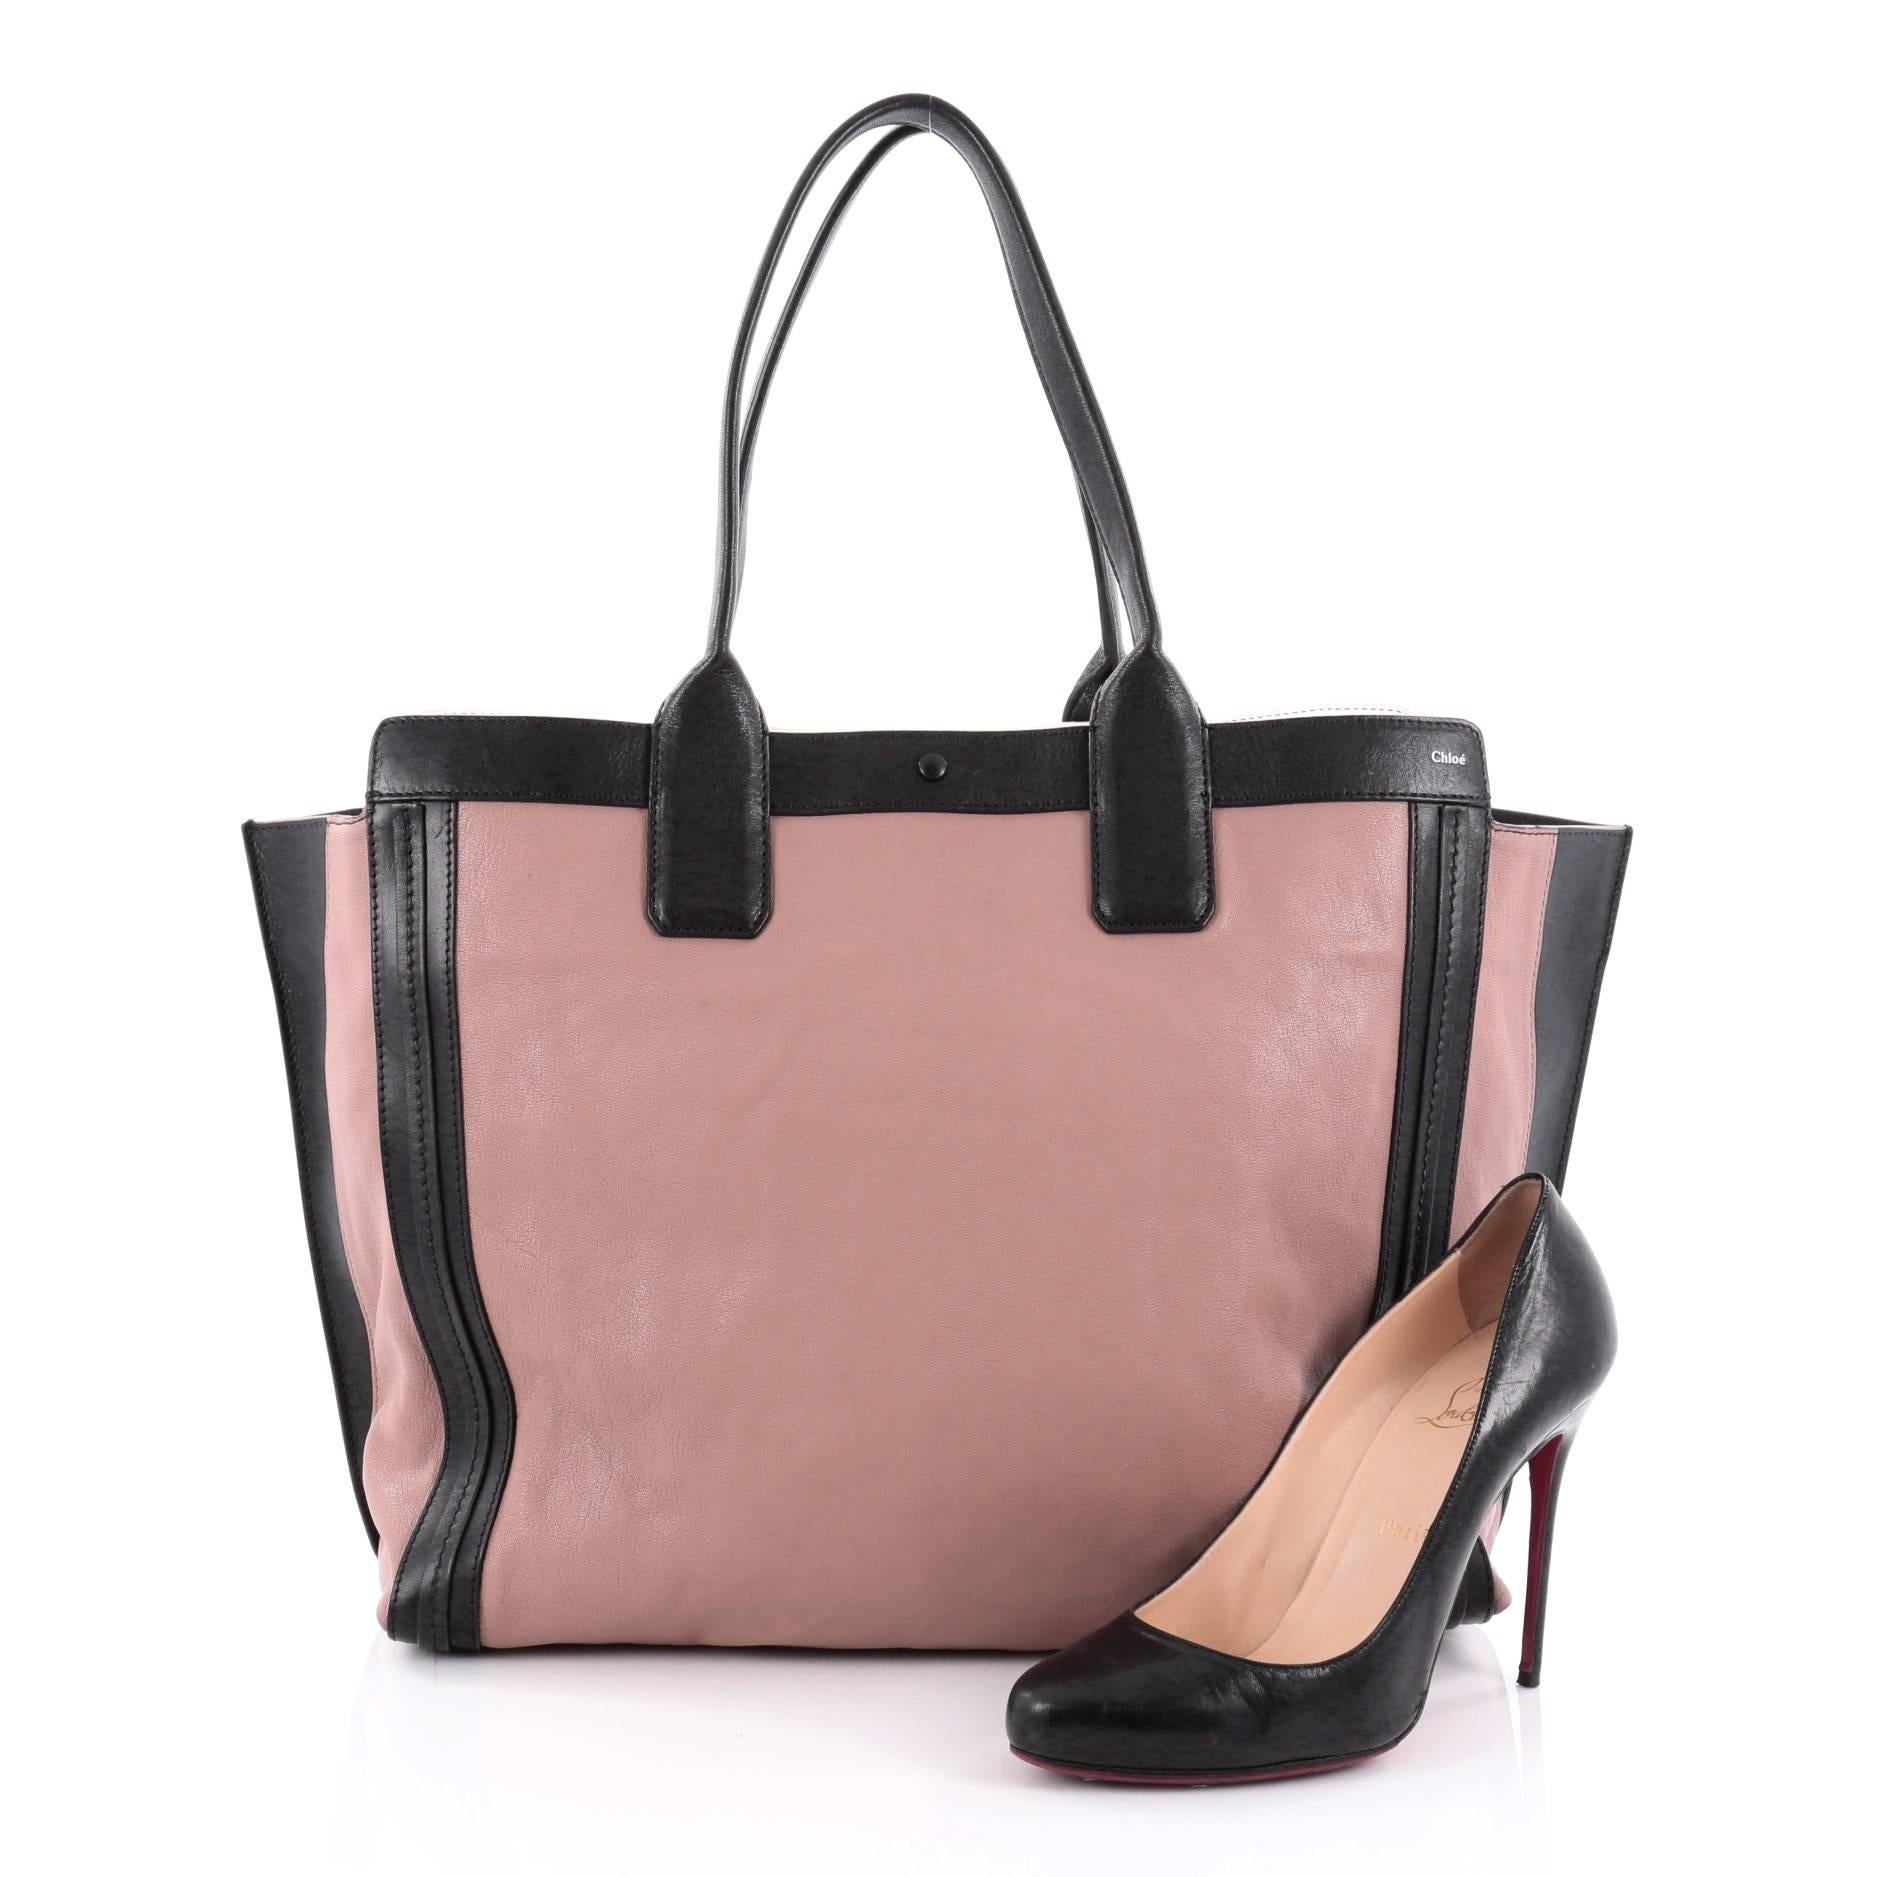 This authentic Chloe Alison East West Tote Leather Medium is a perfect everyday bag. Crafted from mauve leather with black leather trims, this tote features a winged silhouette, dual tall flat handles, subtle stamped Chloe name, and gold-tone